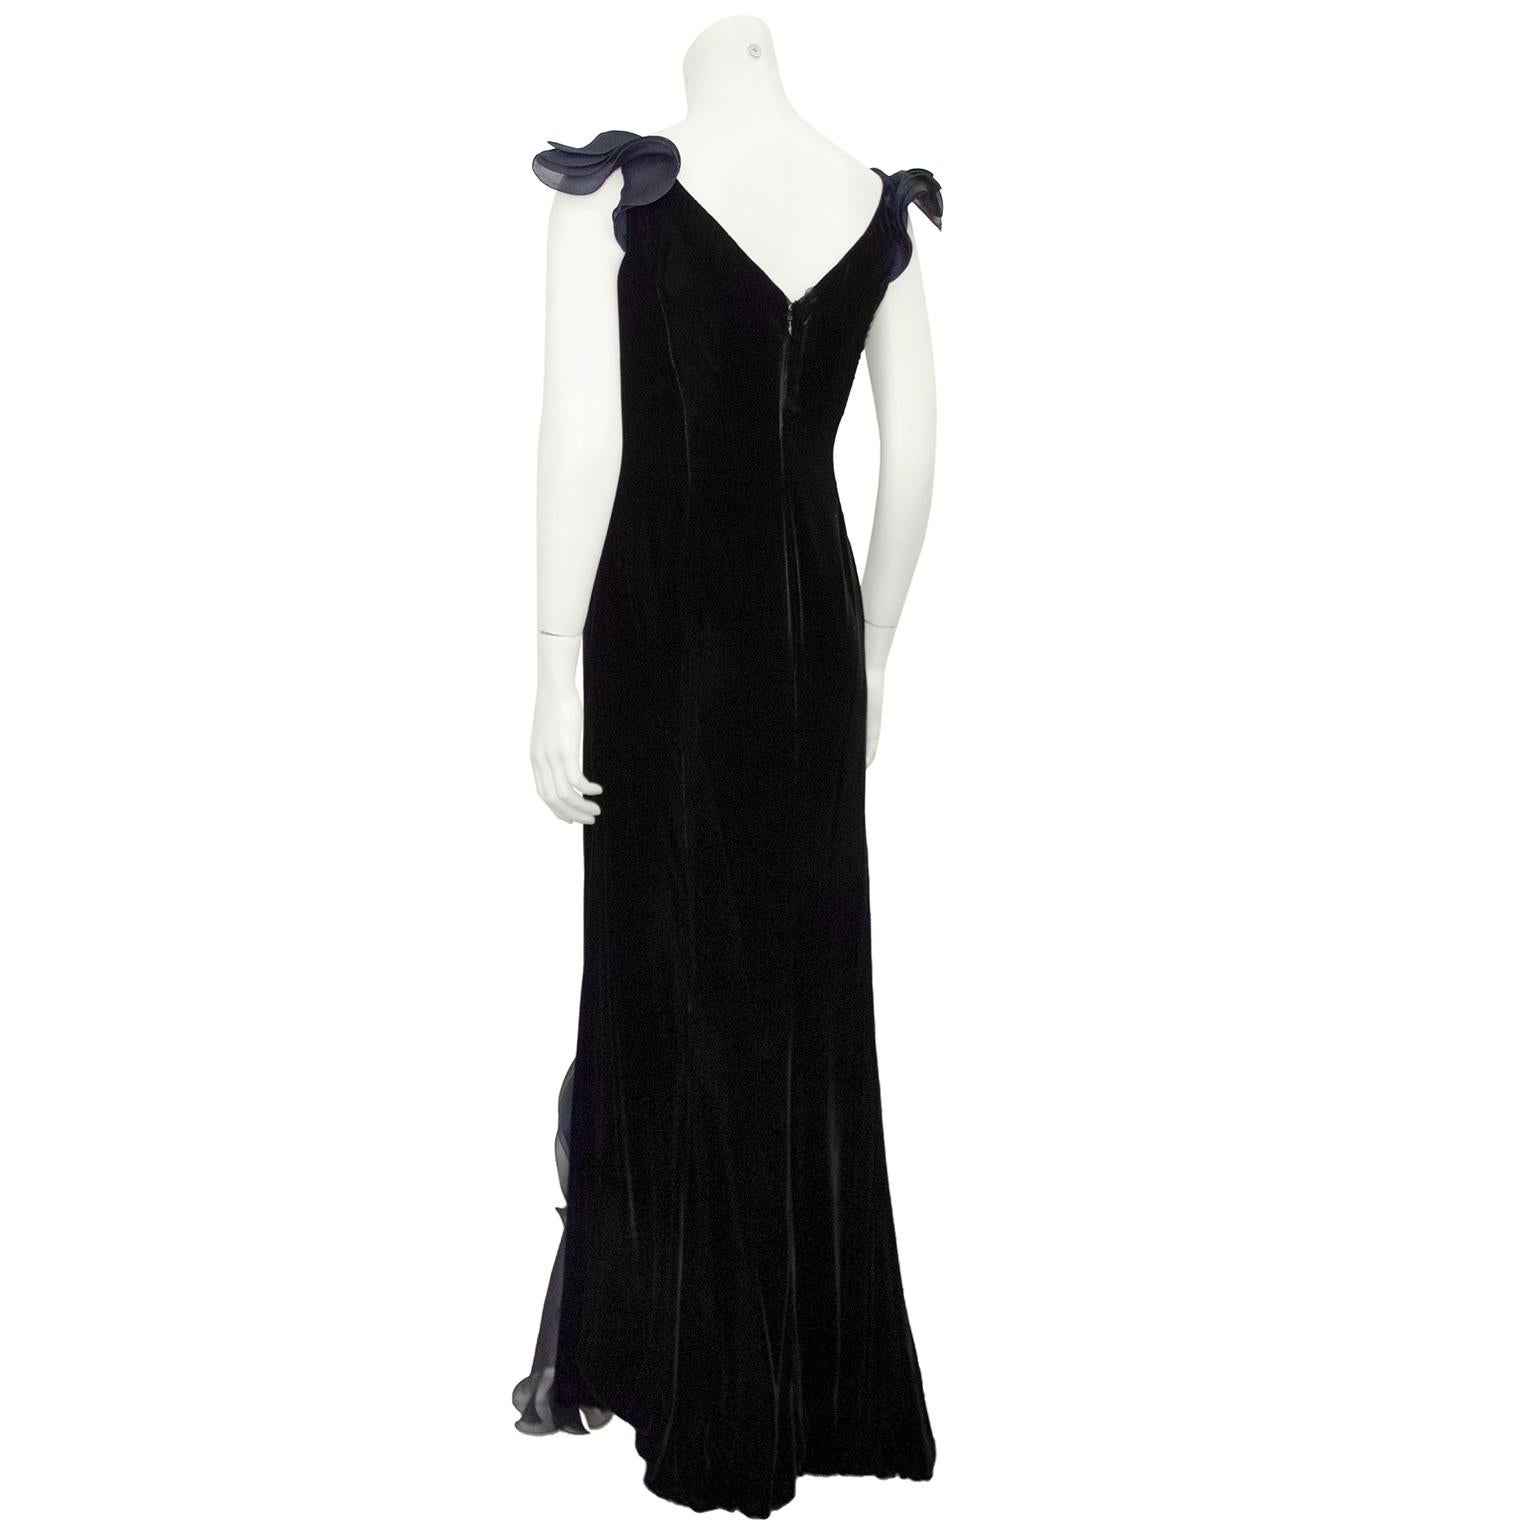 1990s Giorgio Armani Black Velvet Gown with Cascading Layered Chiffon In Good Condition For Sale In Toronto, Ontario